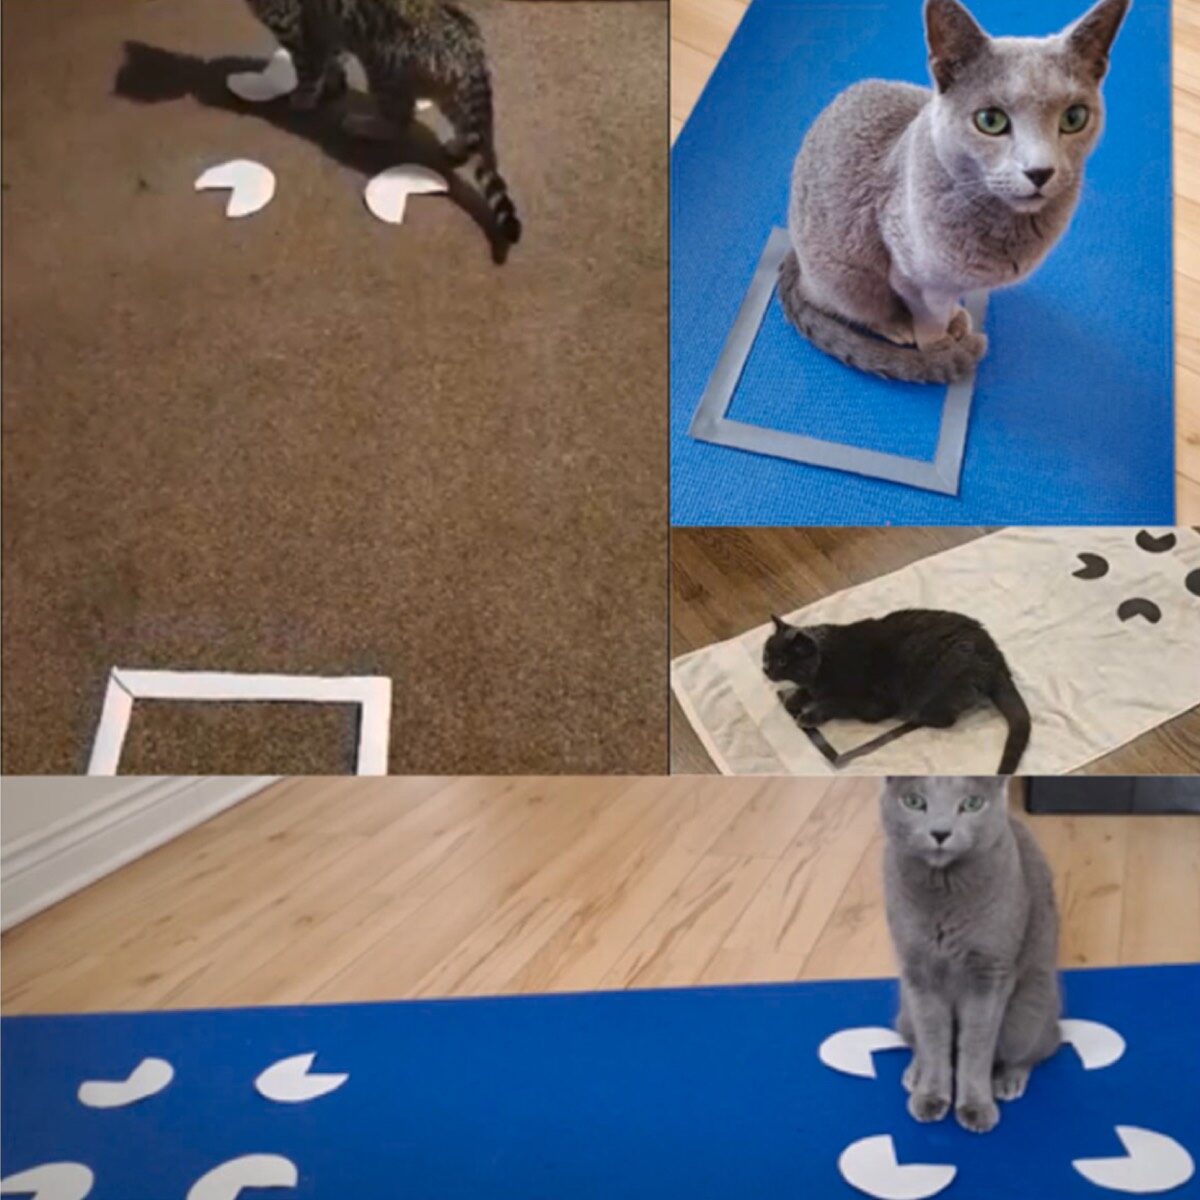 cat visual persception boxes